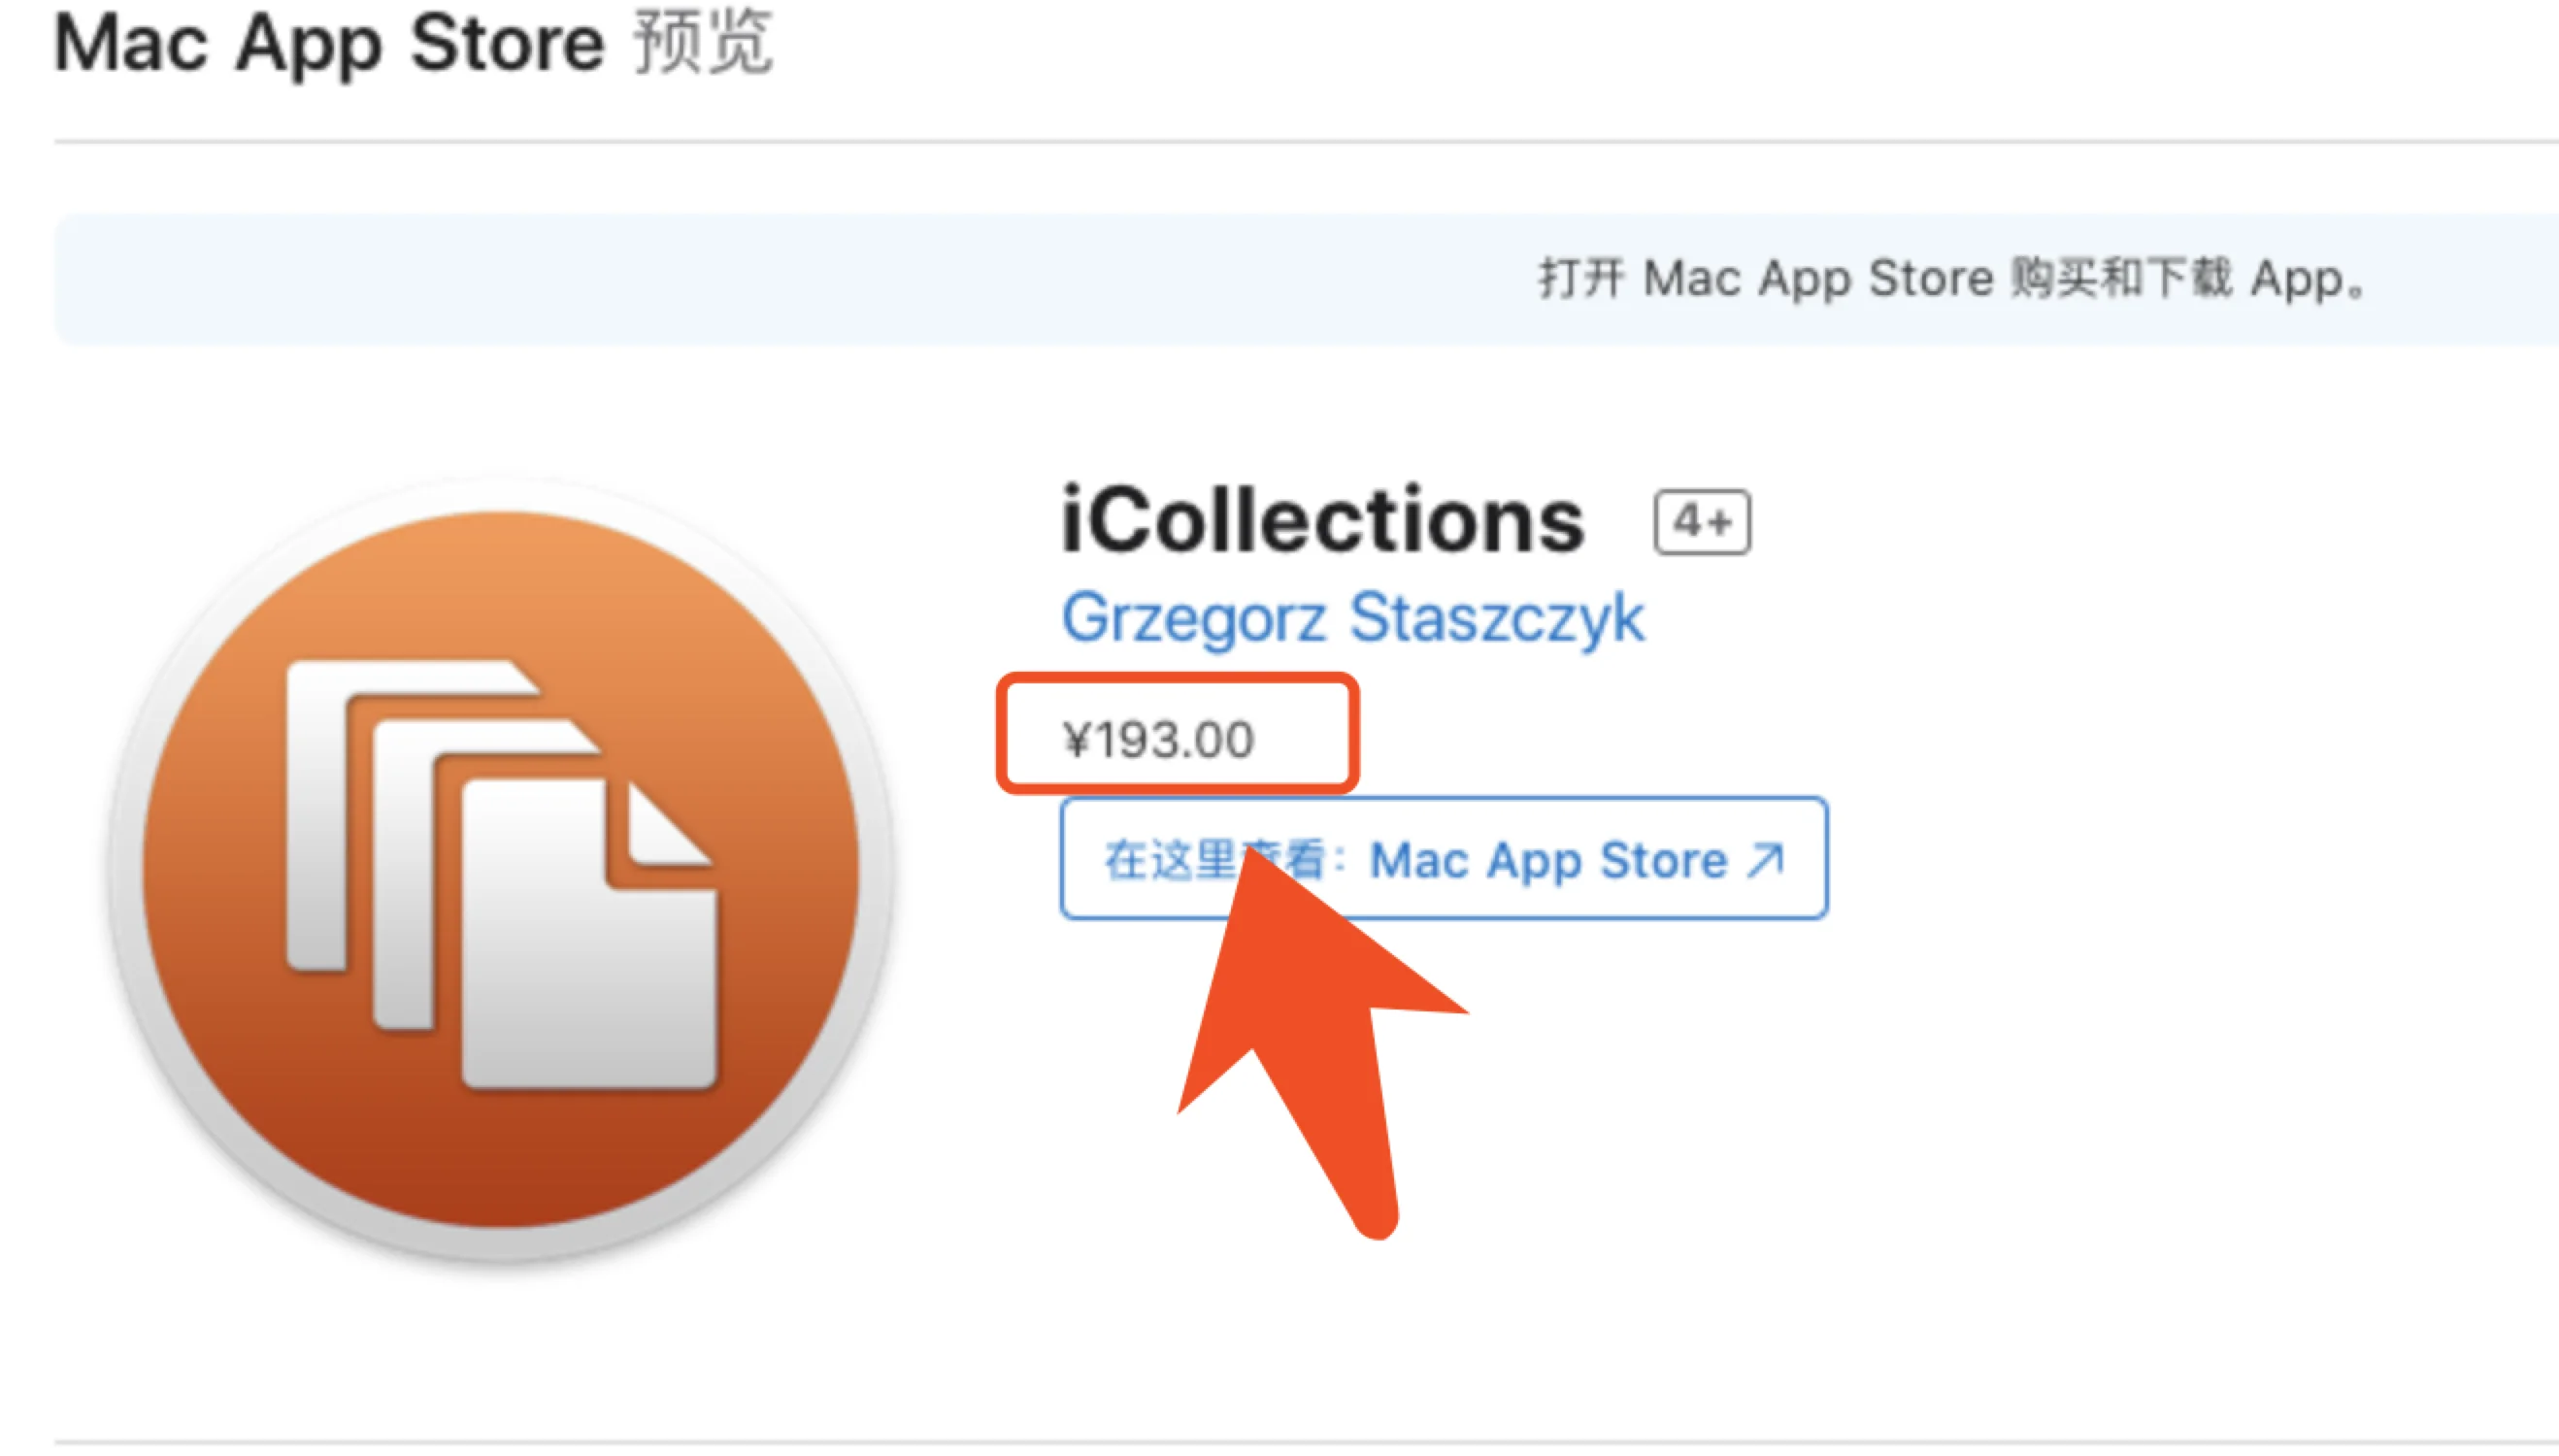 iCollections 6.4.3 (64321) 组织你的桌面图标-马克喵